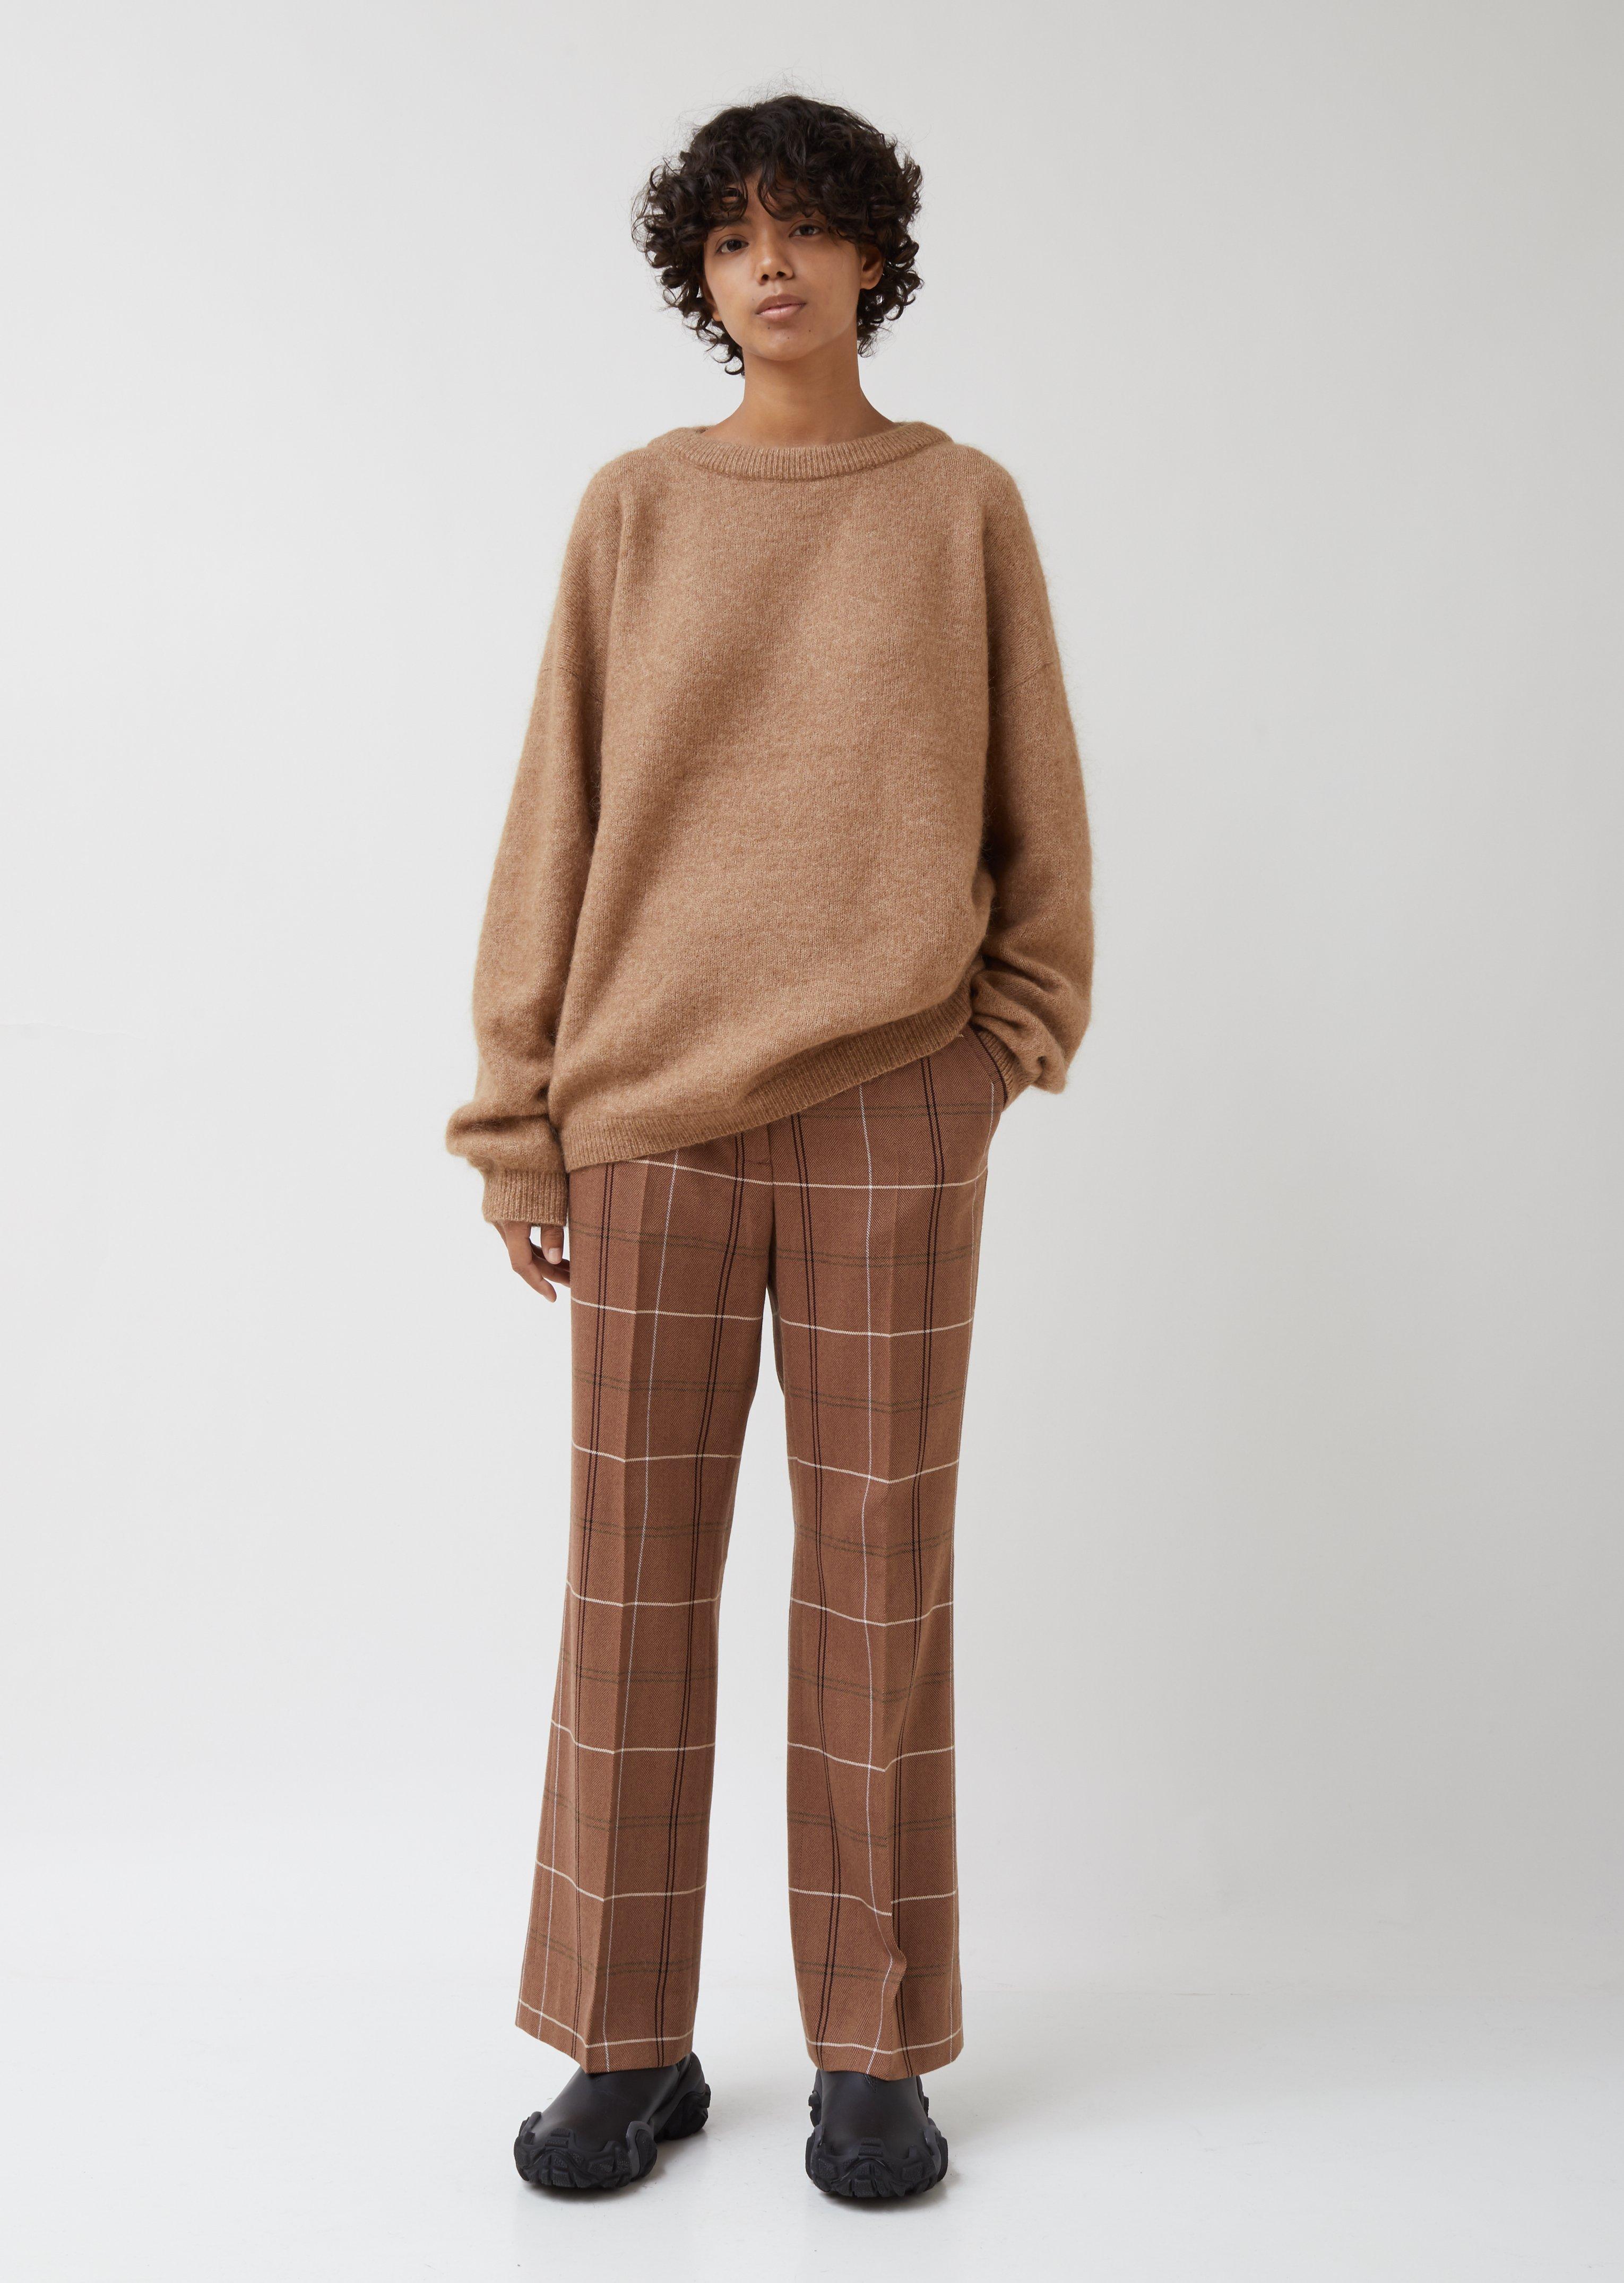 Acne Studios Synthetic Dramatic Moh Sweater in Caramel Brown (Brown) - Lyst